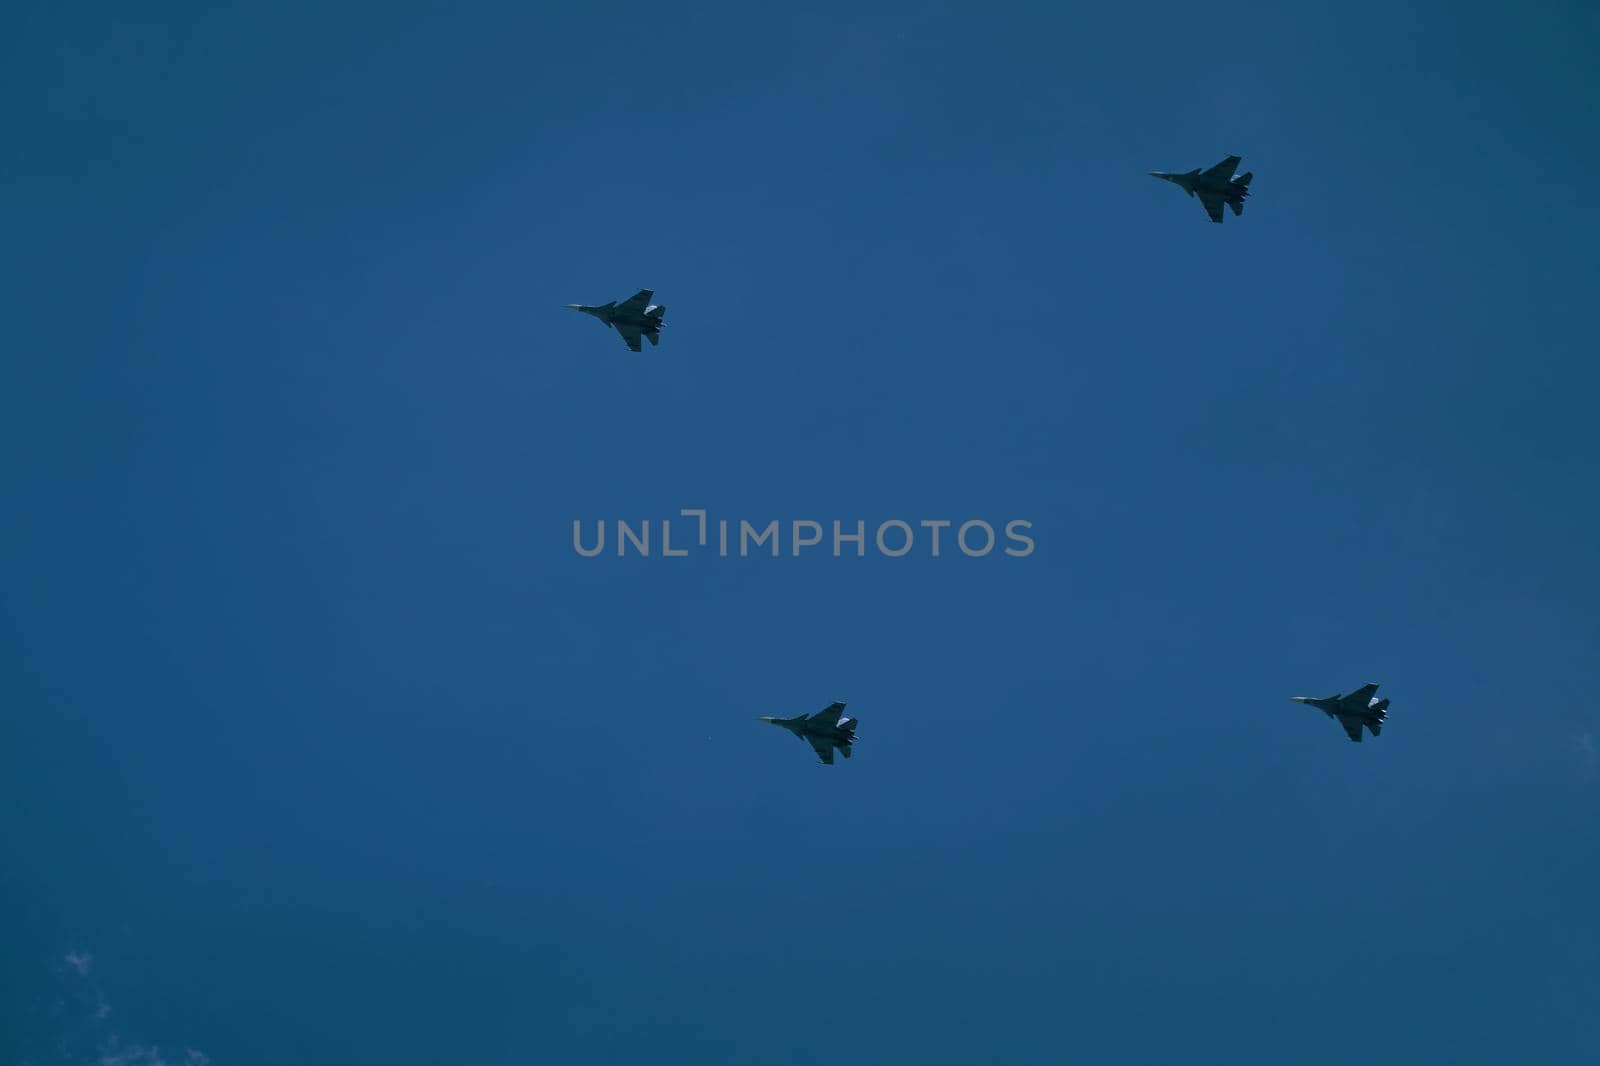 Victory parade of military aircraft over the city. Representation of aviation equipment. Group of army air force shows aerobatics in blue sky.